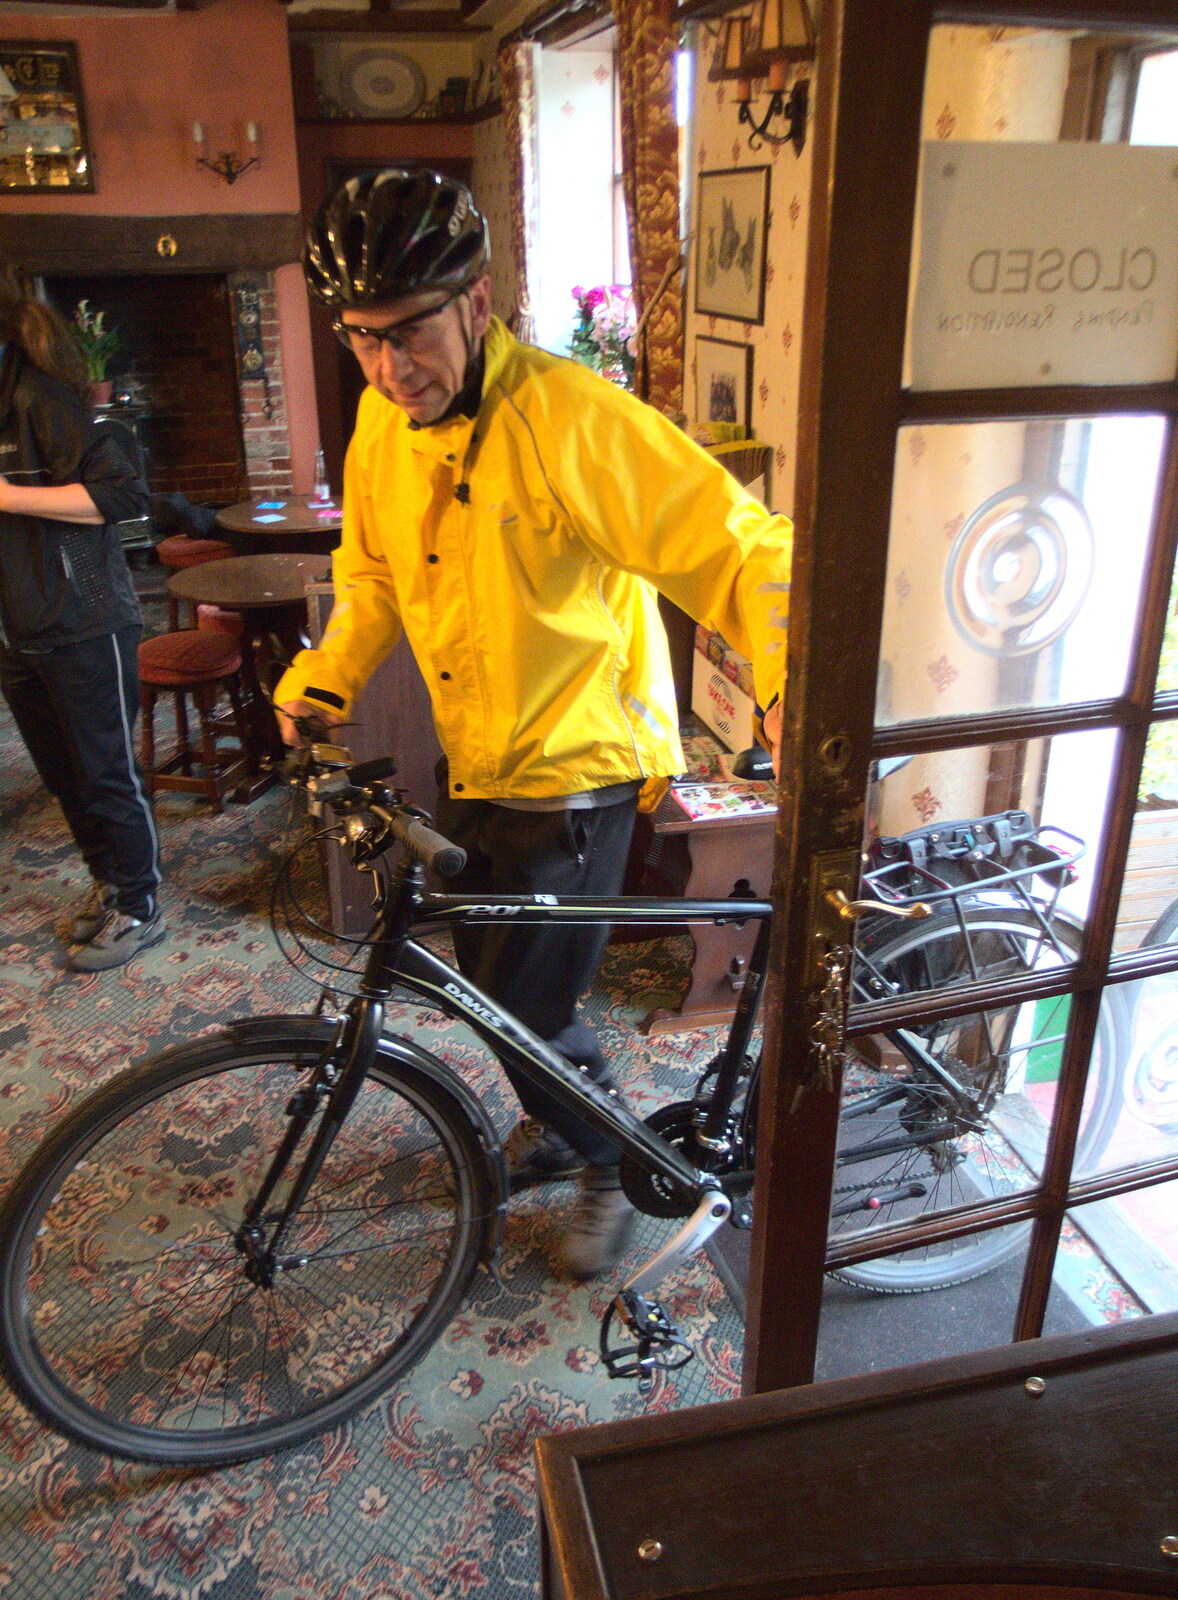 Apple brings his bike in from The BSCC at the Mellis Railway and The Swan, Brome, Suffolk - 8th June 2017